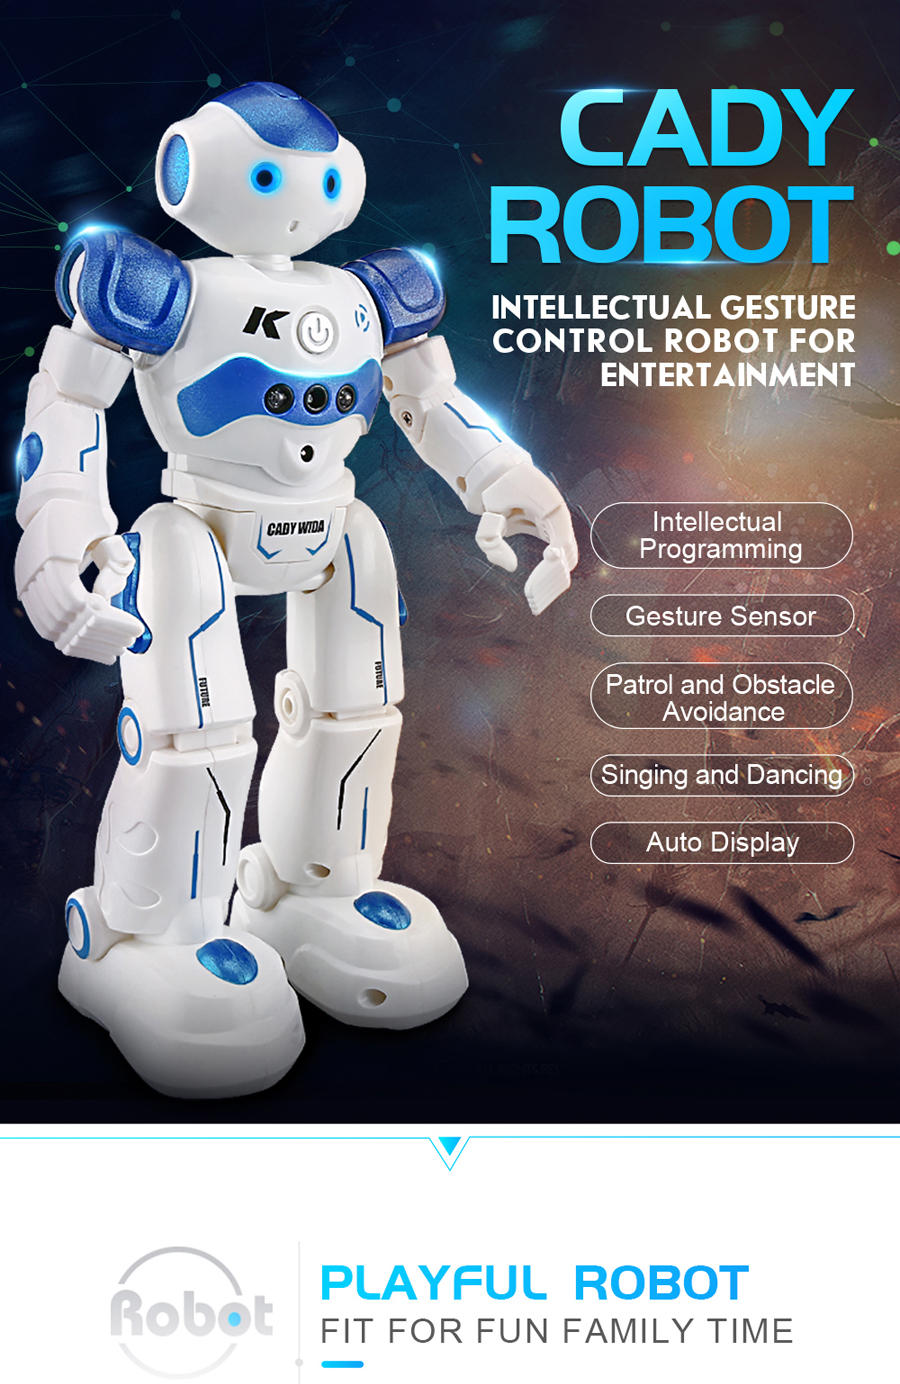 JJRC-R2-Cady-USB-Charging-Dancing-Gesture-Control-Robot-Toy-1181780-1